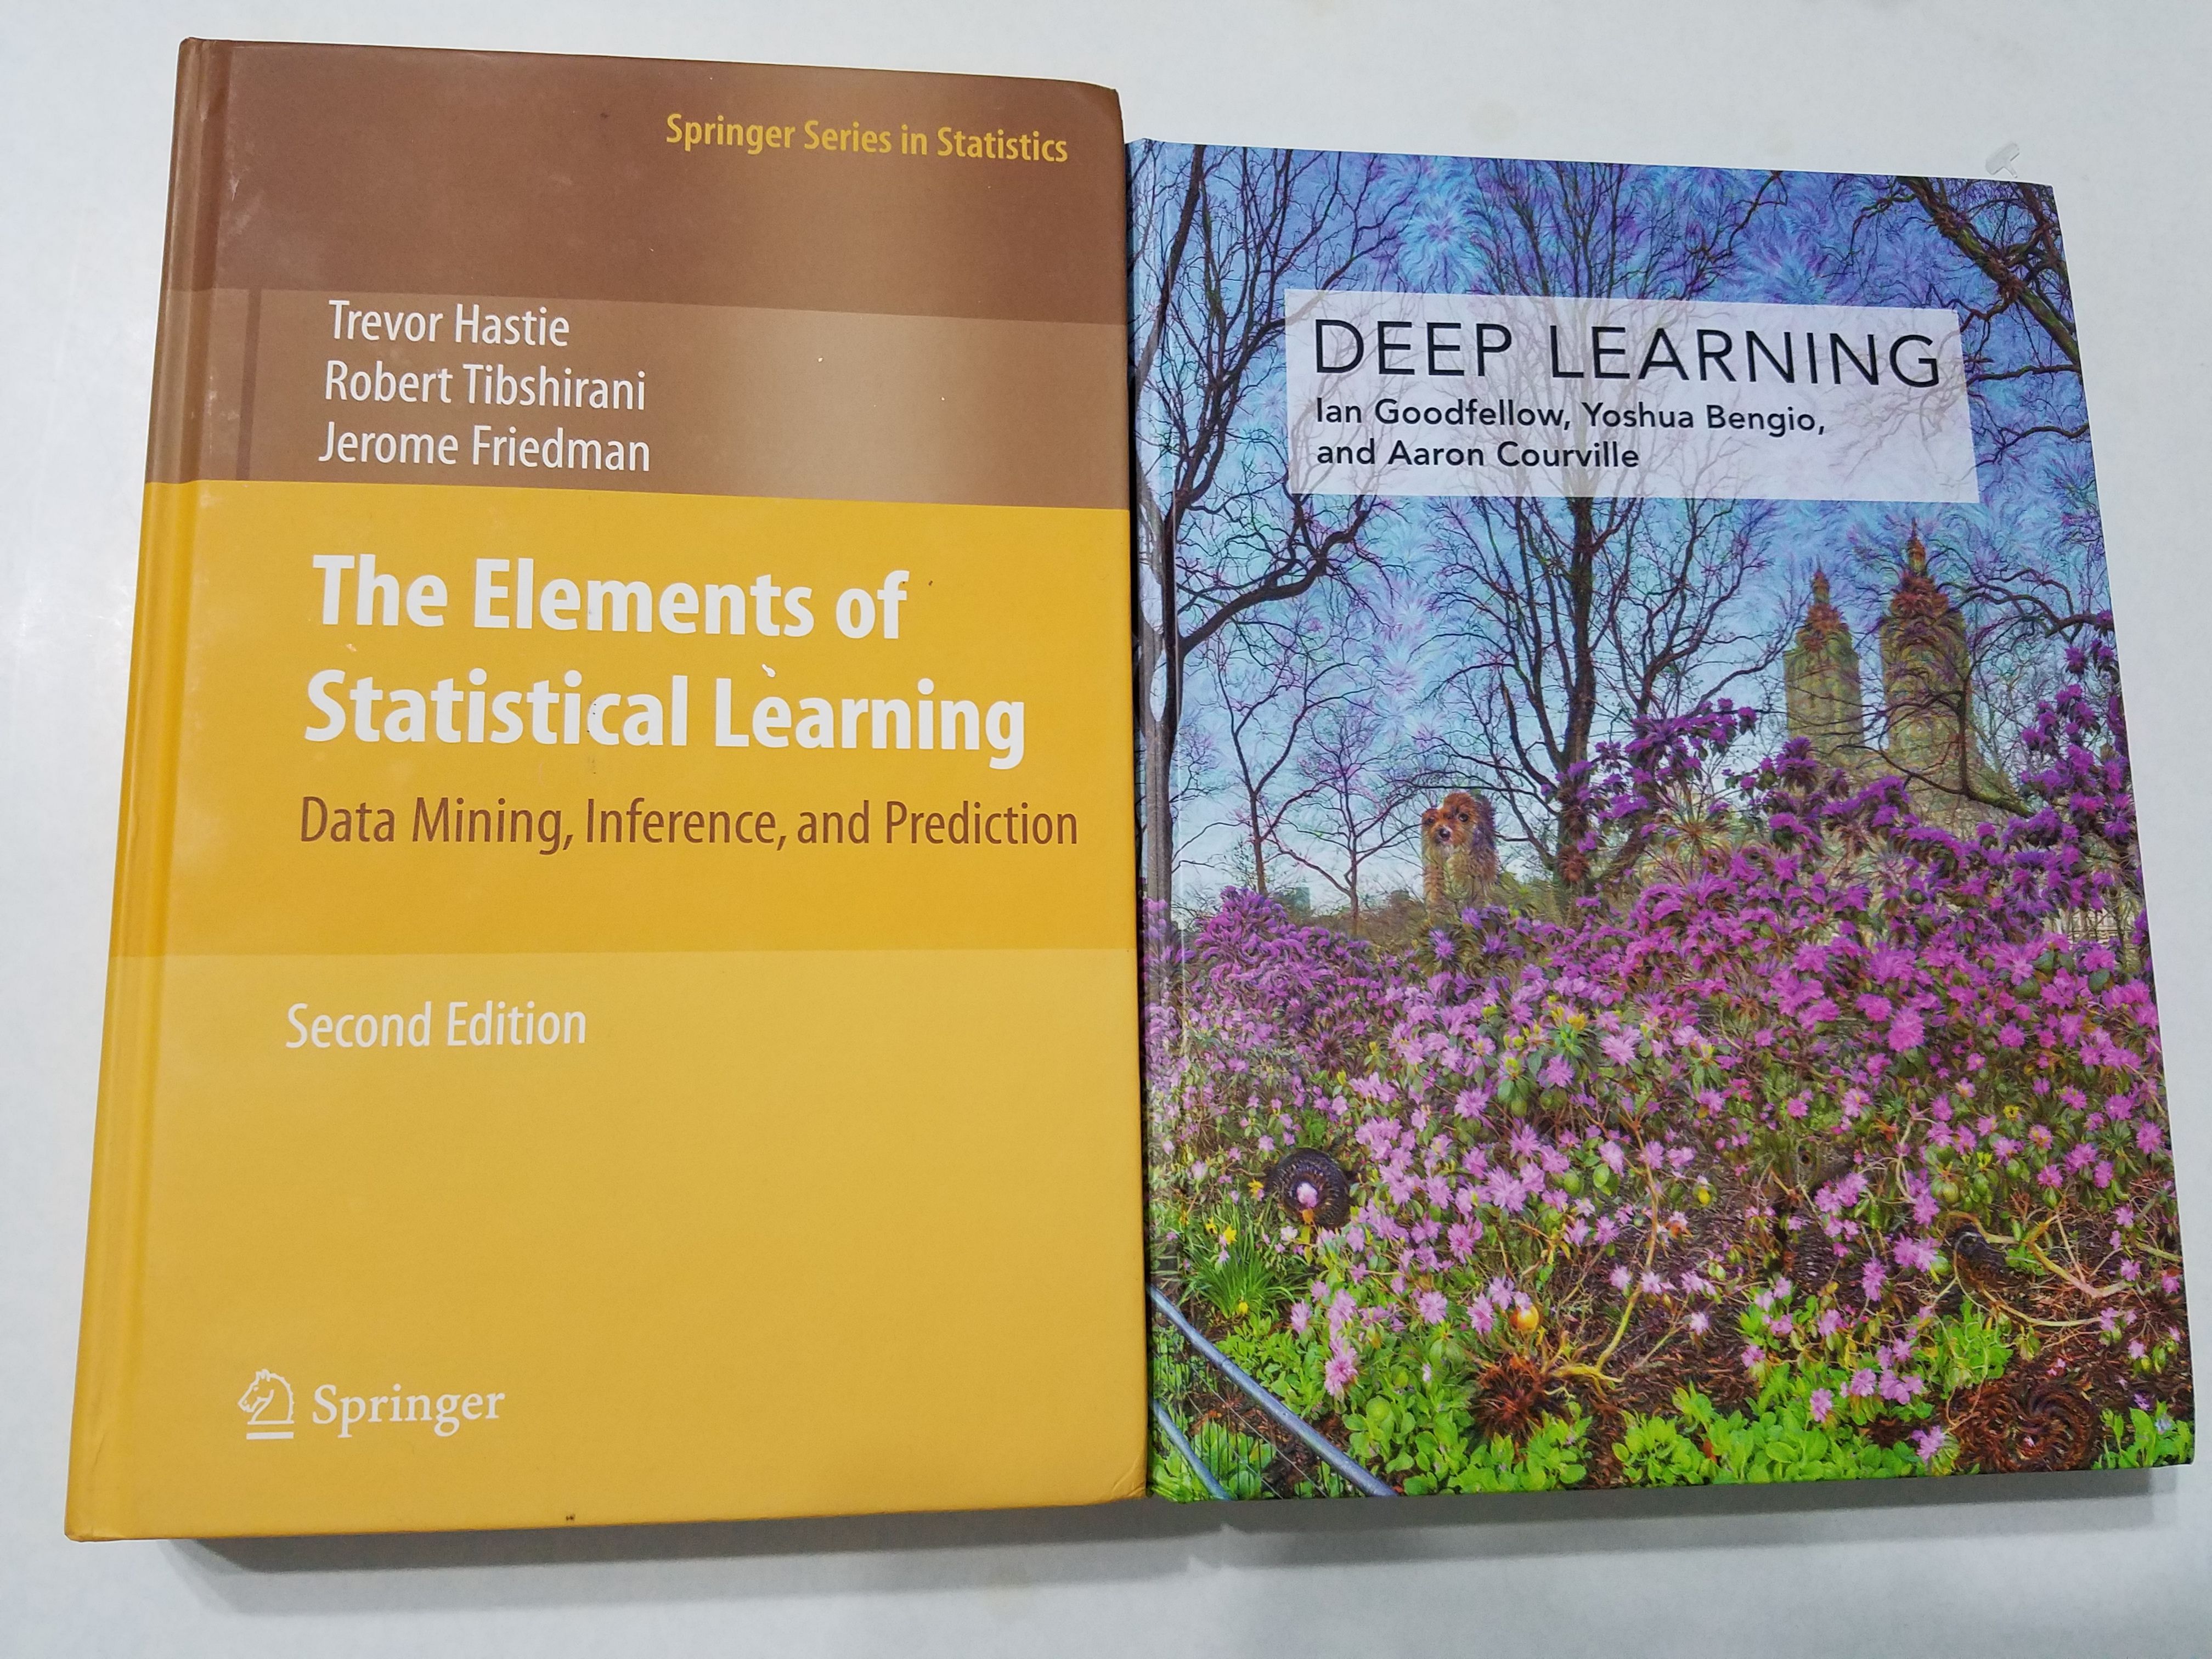 The Elements of Statistical Learning - Data Mining, Inference, and Prediction, Second Edition